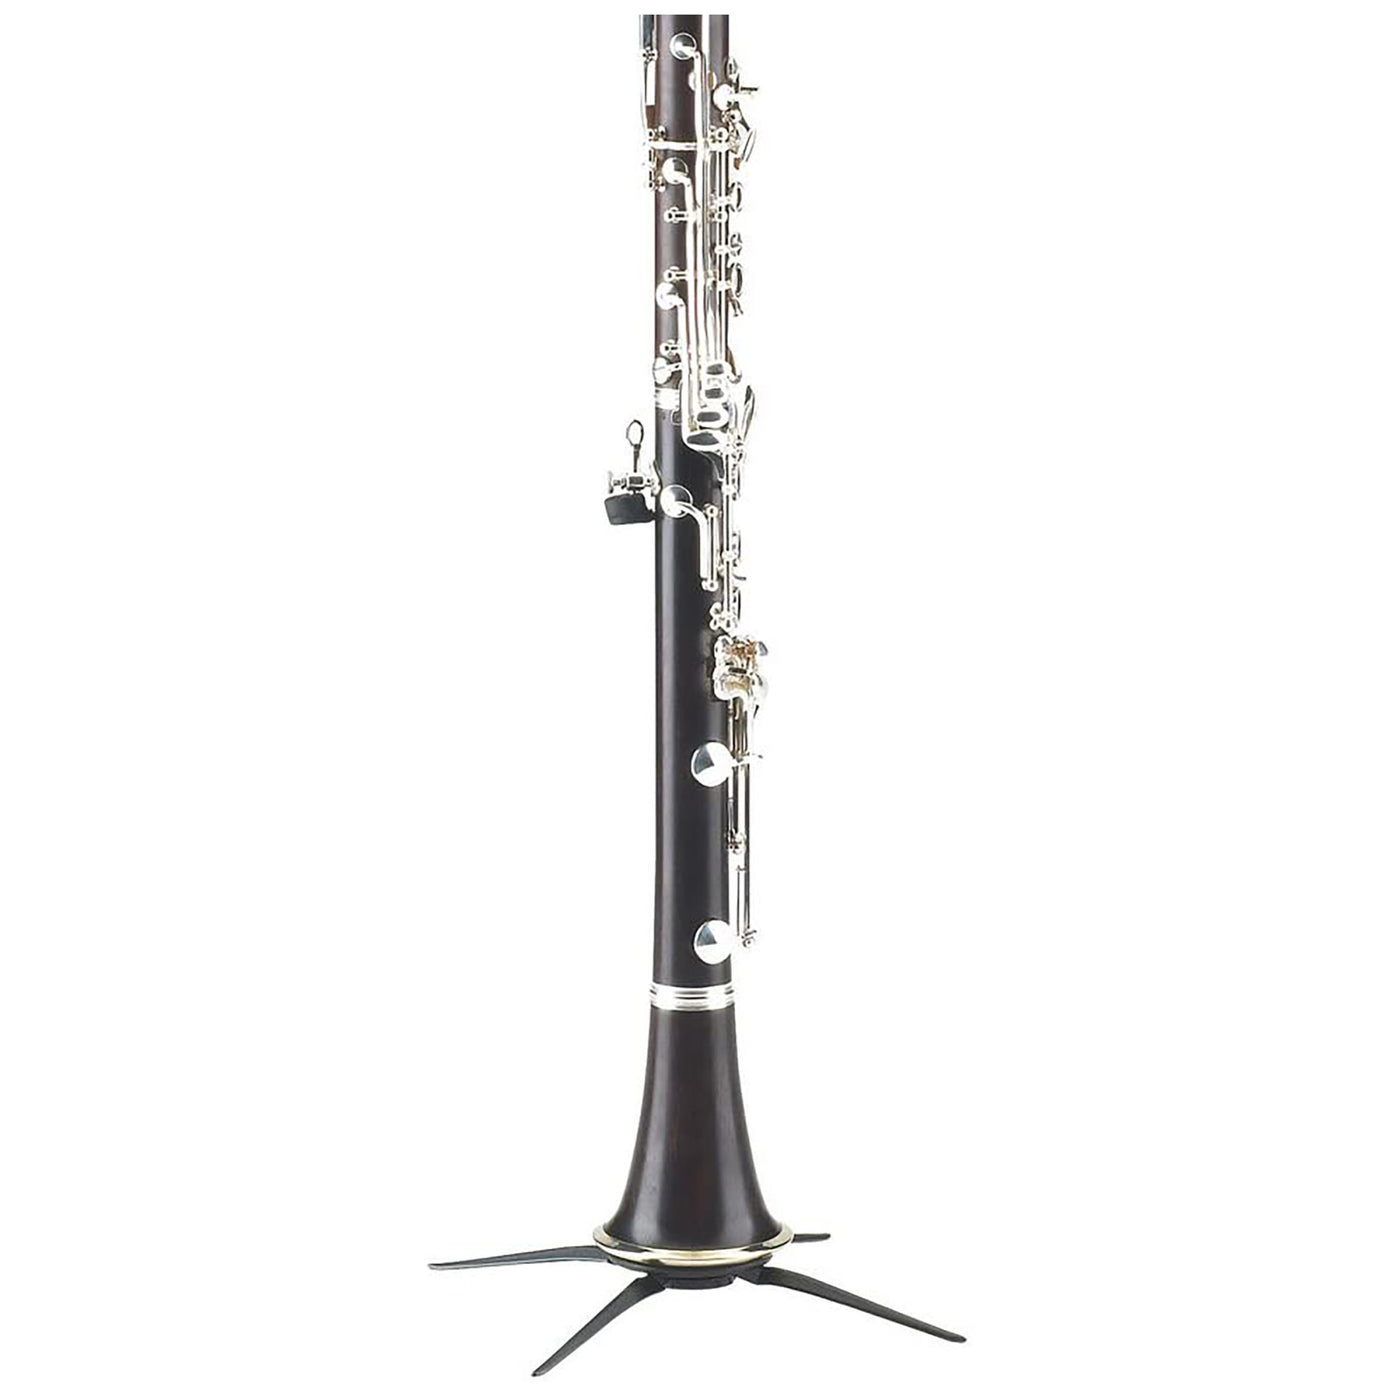 K&M Clarinet In-Bell Stand - Black